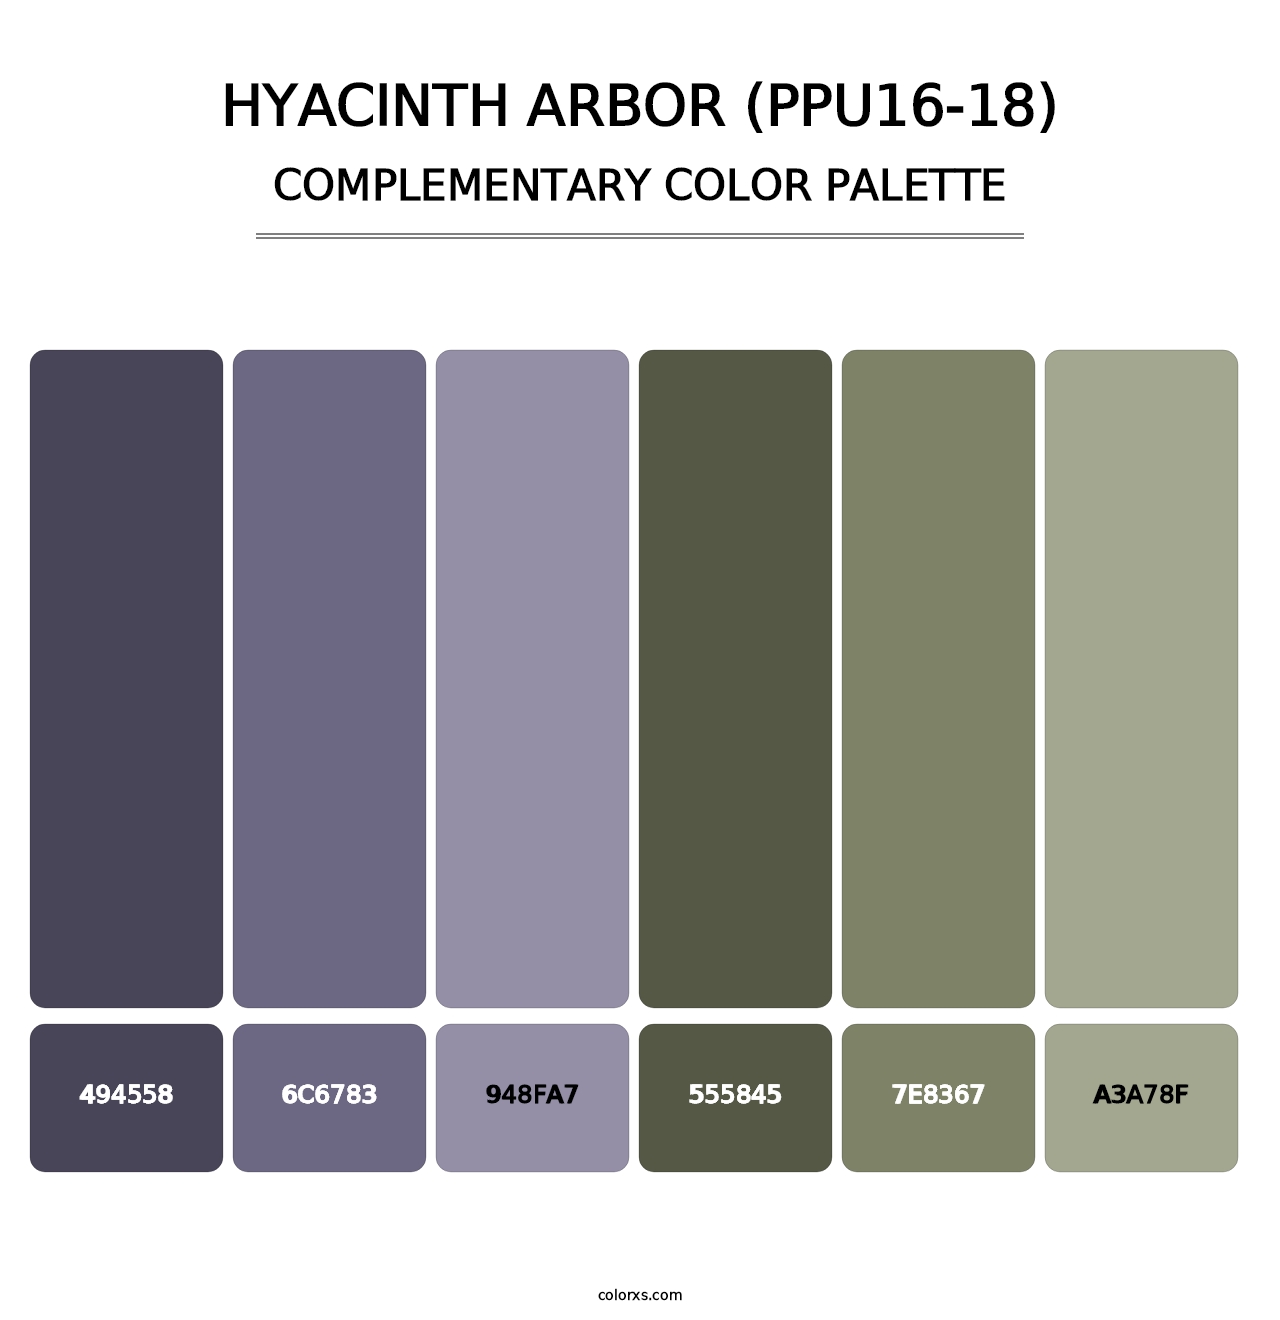 Hyacinth Arbor (PPU16-18) - Complementary Color Palette